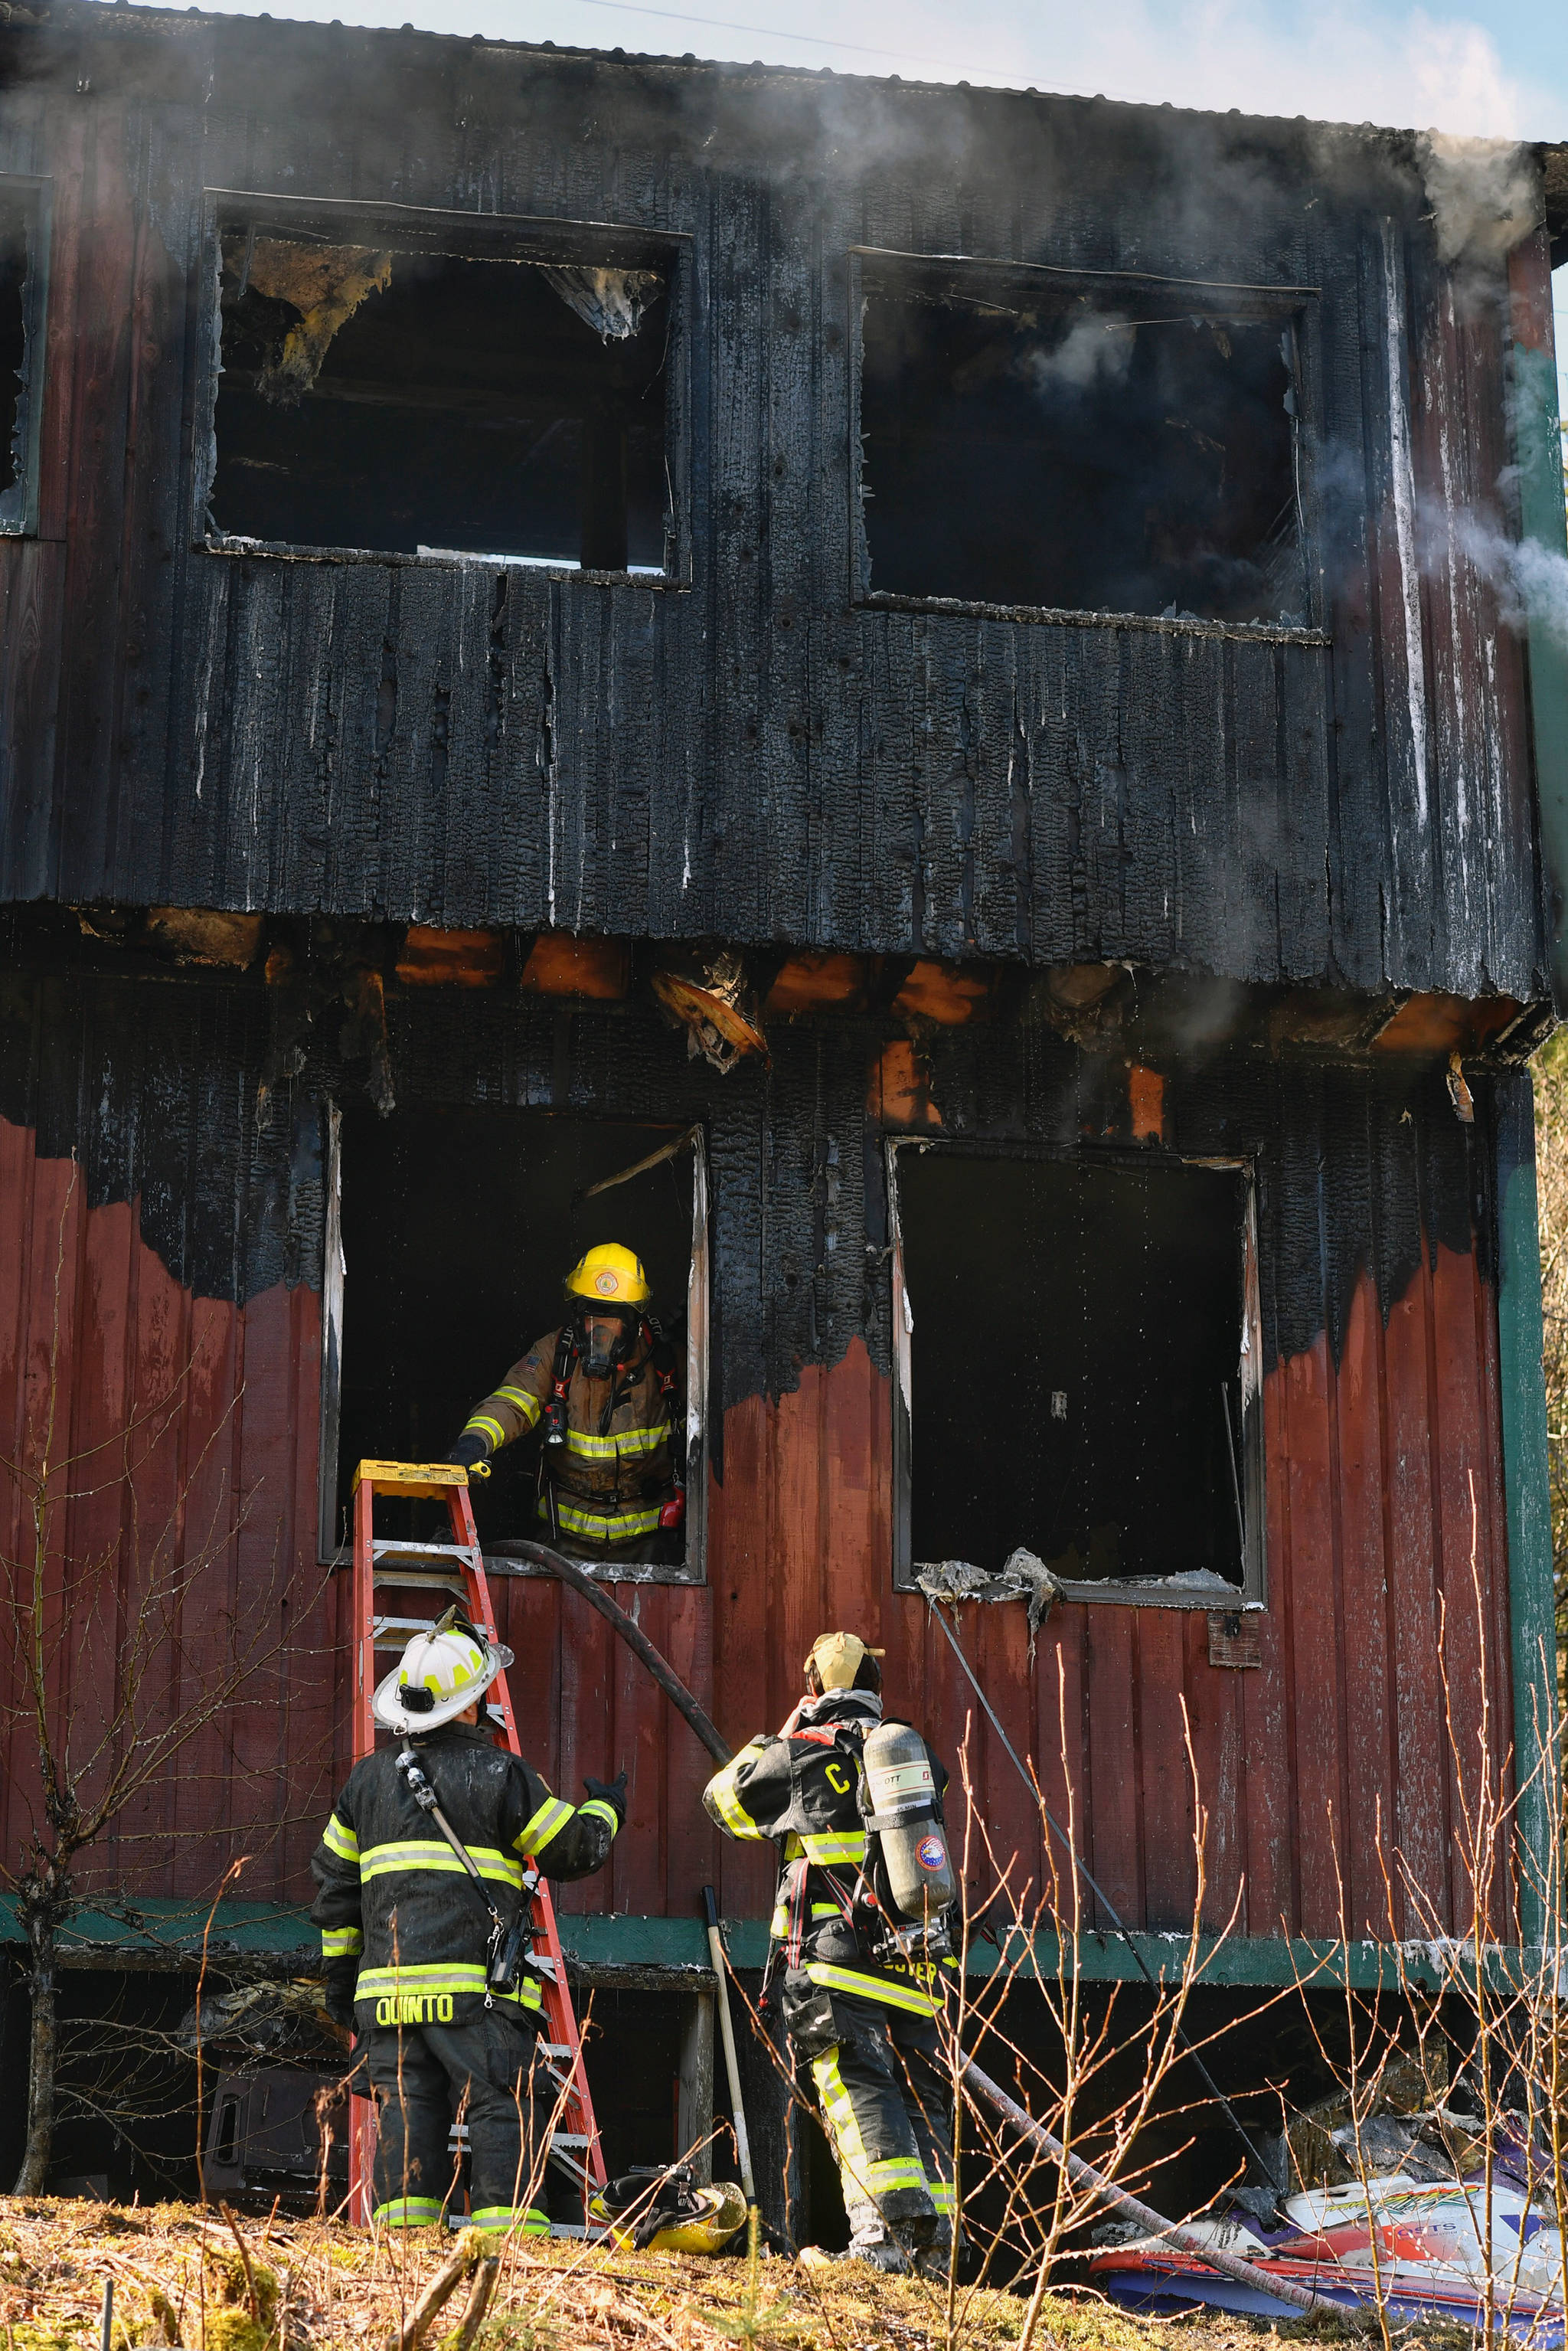 Firefighters work a house fire on North Douglas Highway on Thursday, March 28, 2019. (Michael Penn | Juneau Empire)